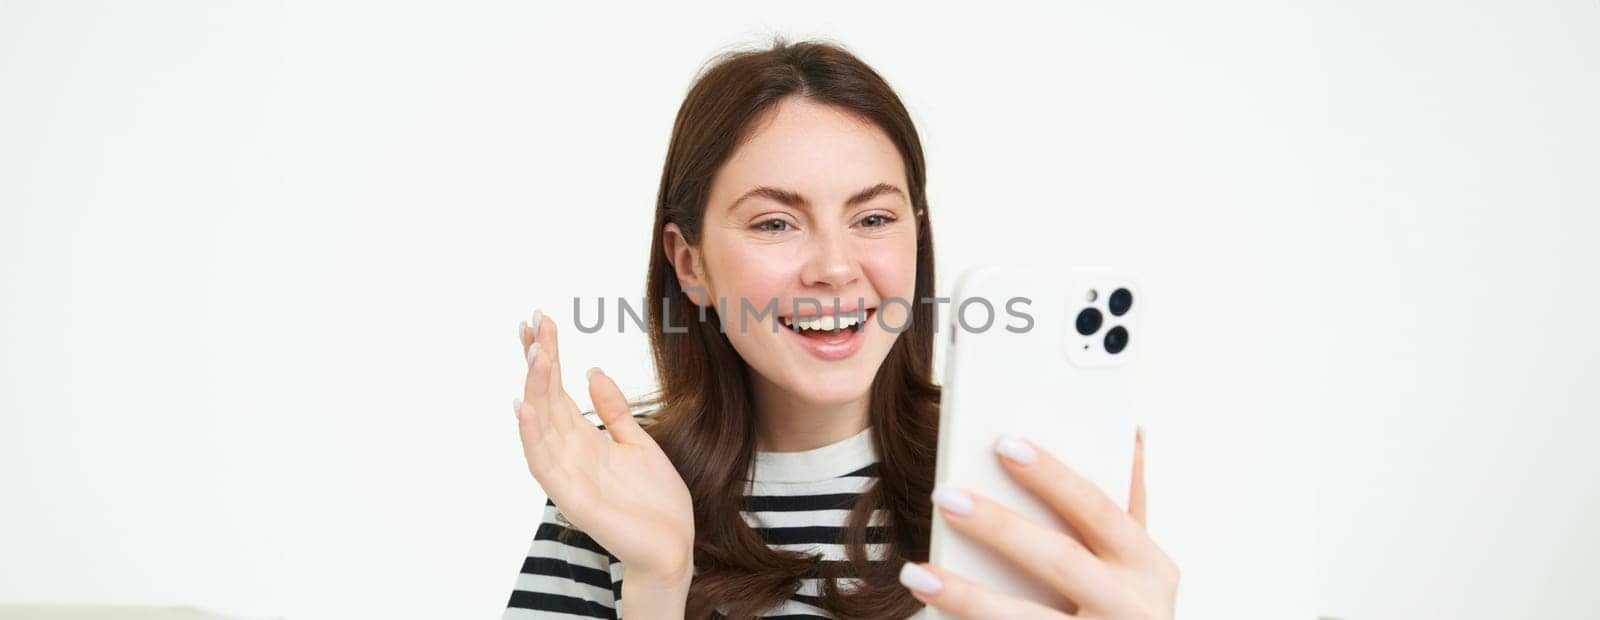 Portrait of young modern girl connects to video chats, talks with friend online using smartphone app, waves at mobile phone camera, white background.